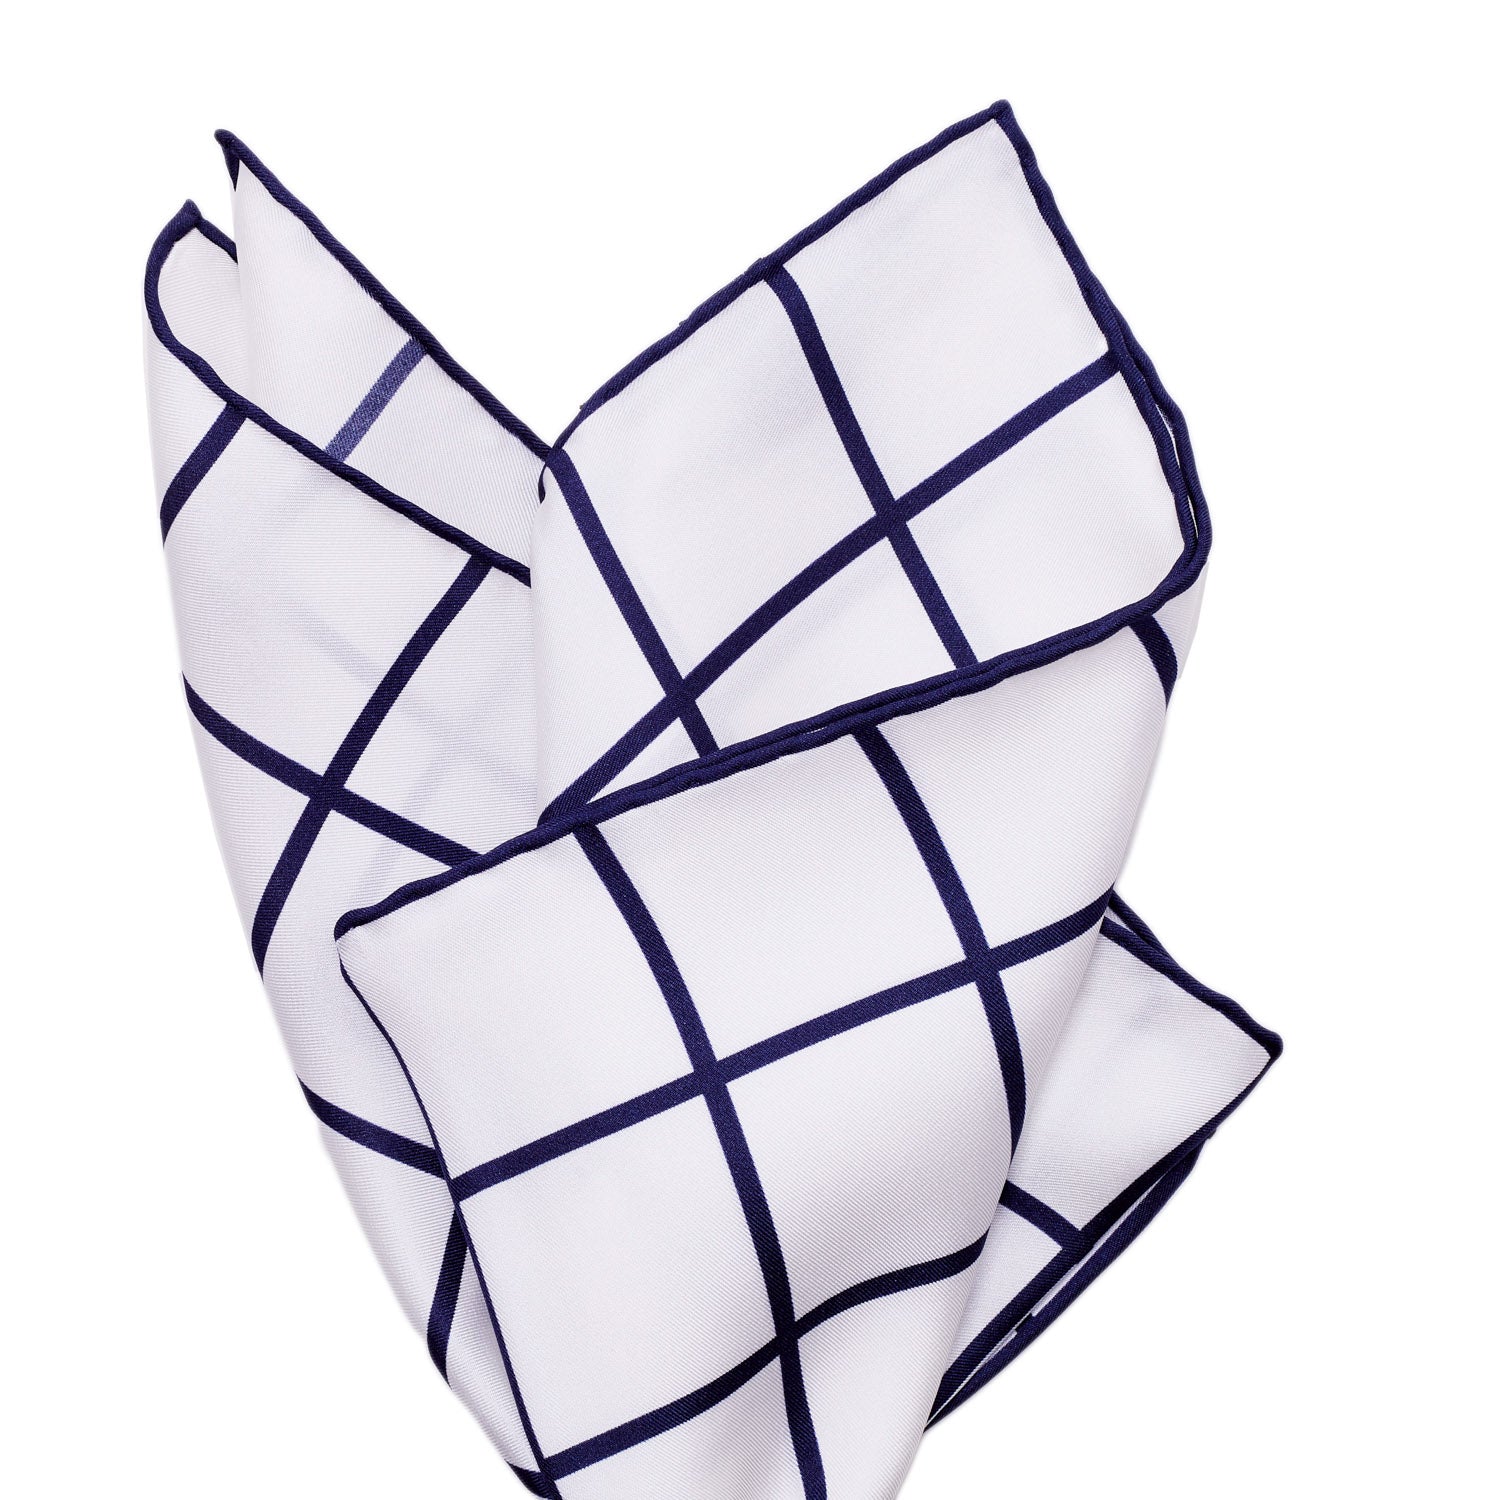 A Sovereign Grade Prince of Wales Pocket Square in White/Navy from KirbyAllison.com.